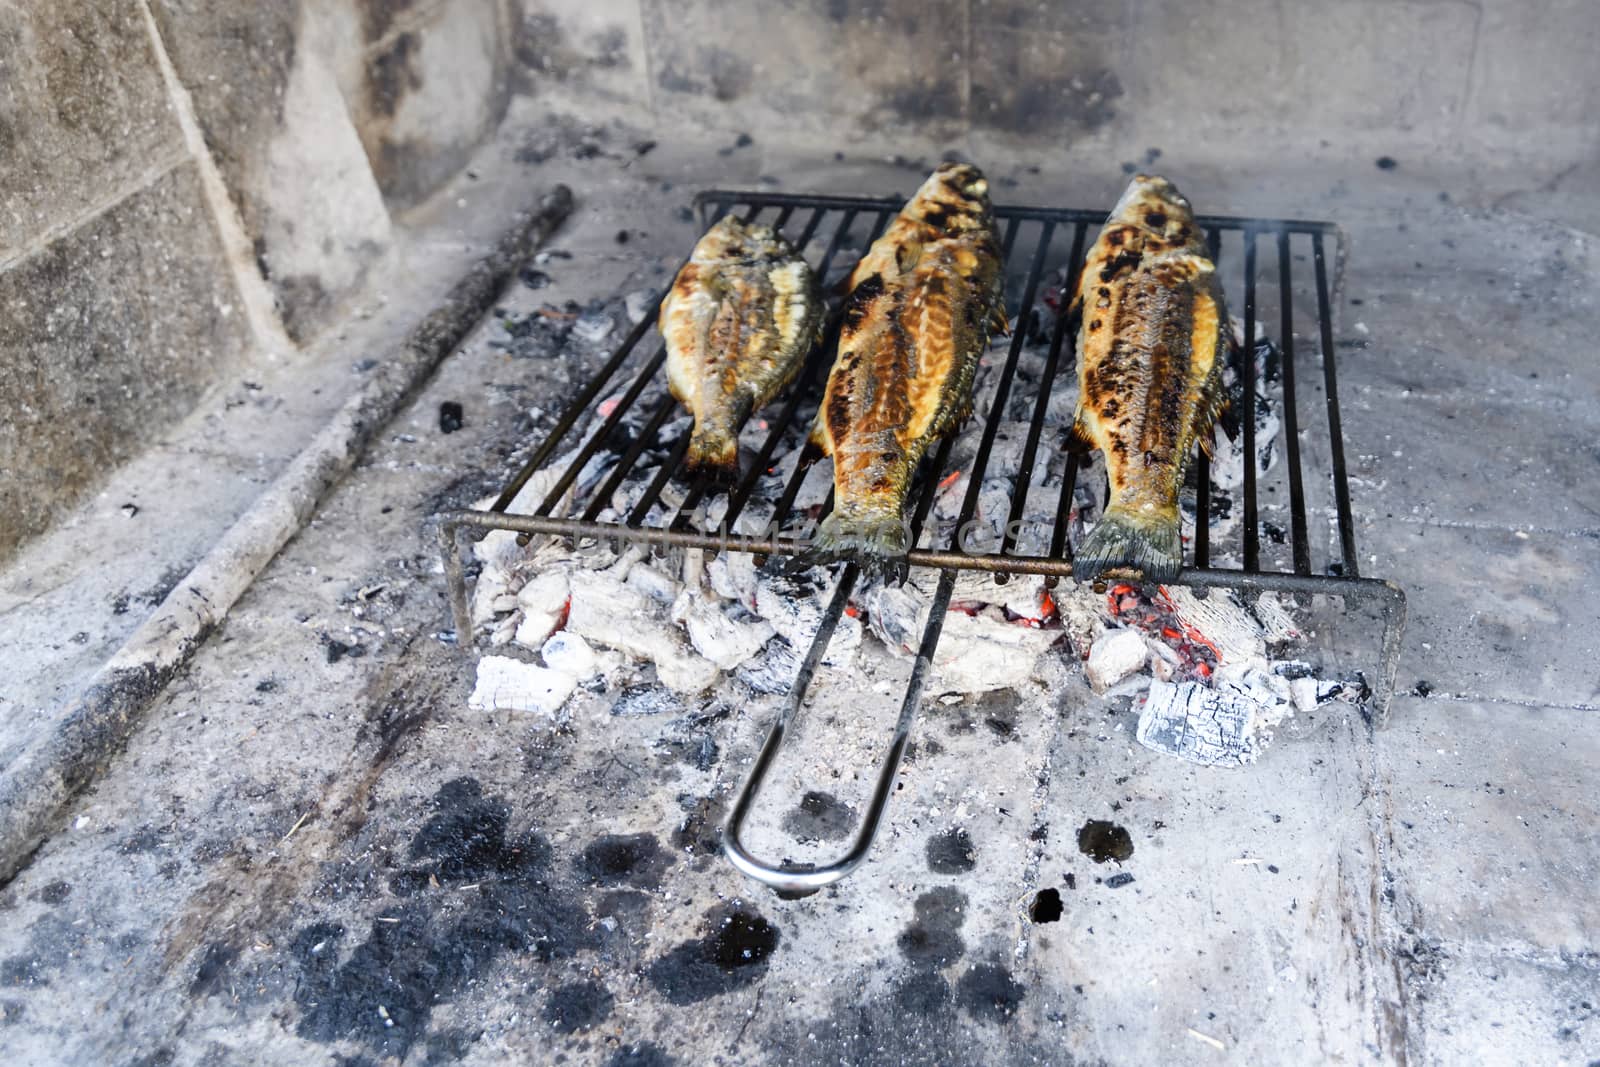 Sea bass grilled the traditional Dalmatian way on steel grill bars on hard wood embers